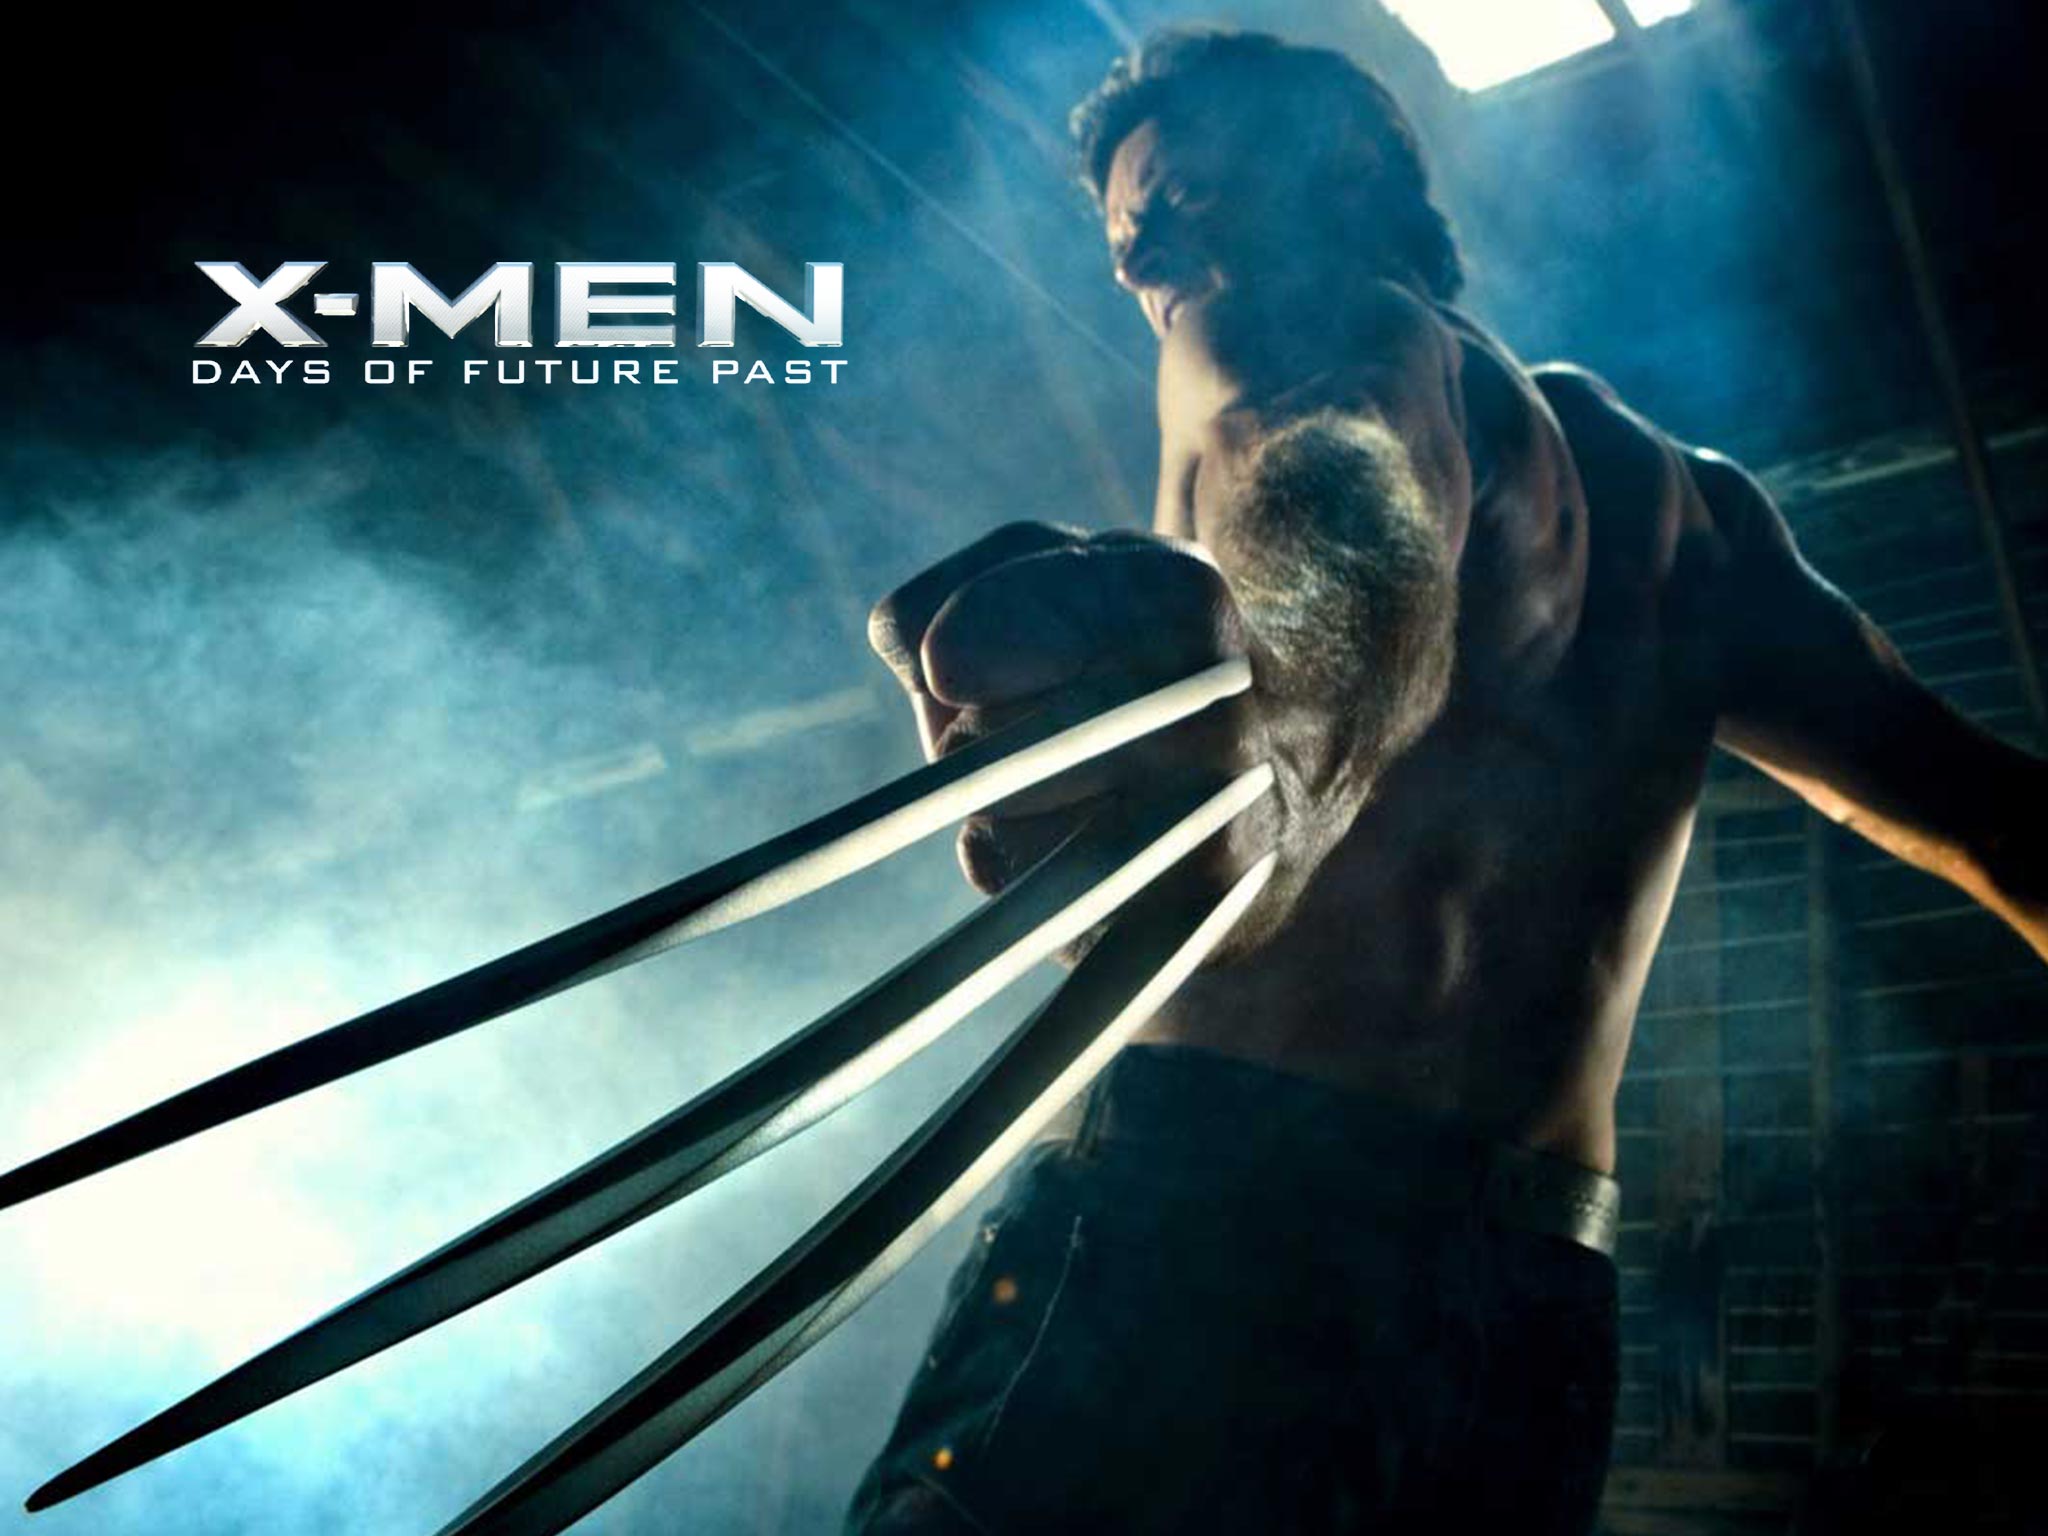 X-Men: Days of Future Past Movie 2014 HD, iPad & iPhone Wallpapers